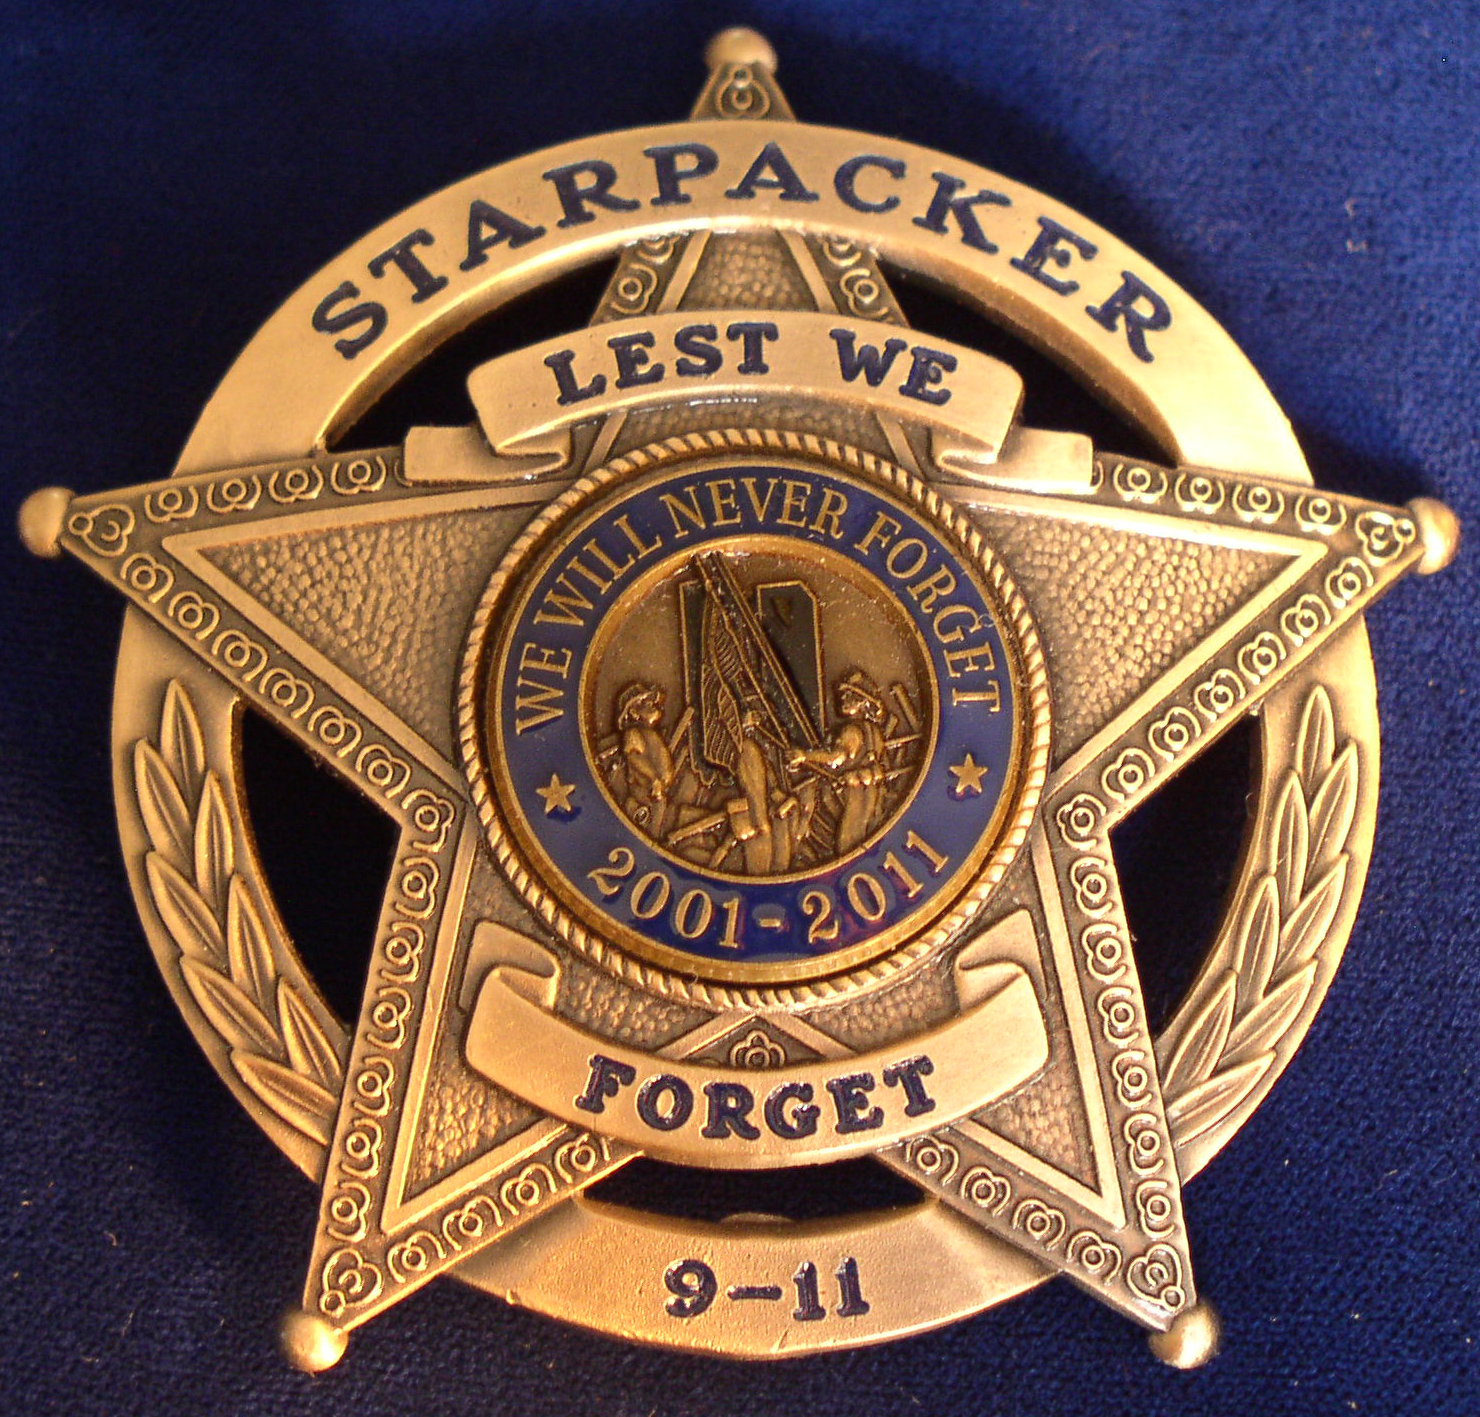 StarPacker's 911 Remembrance Star badge